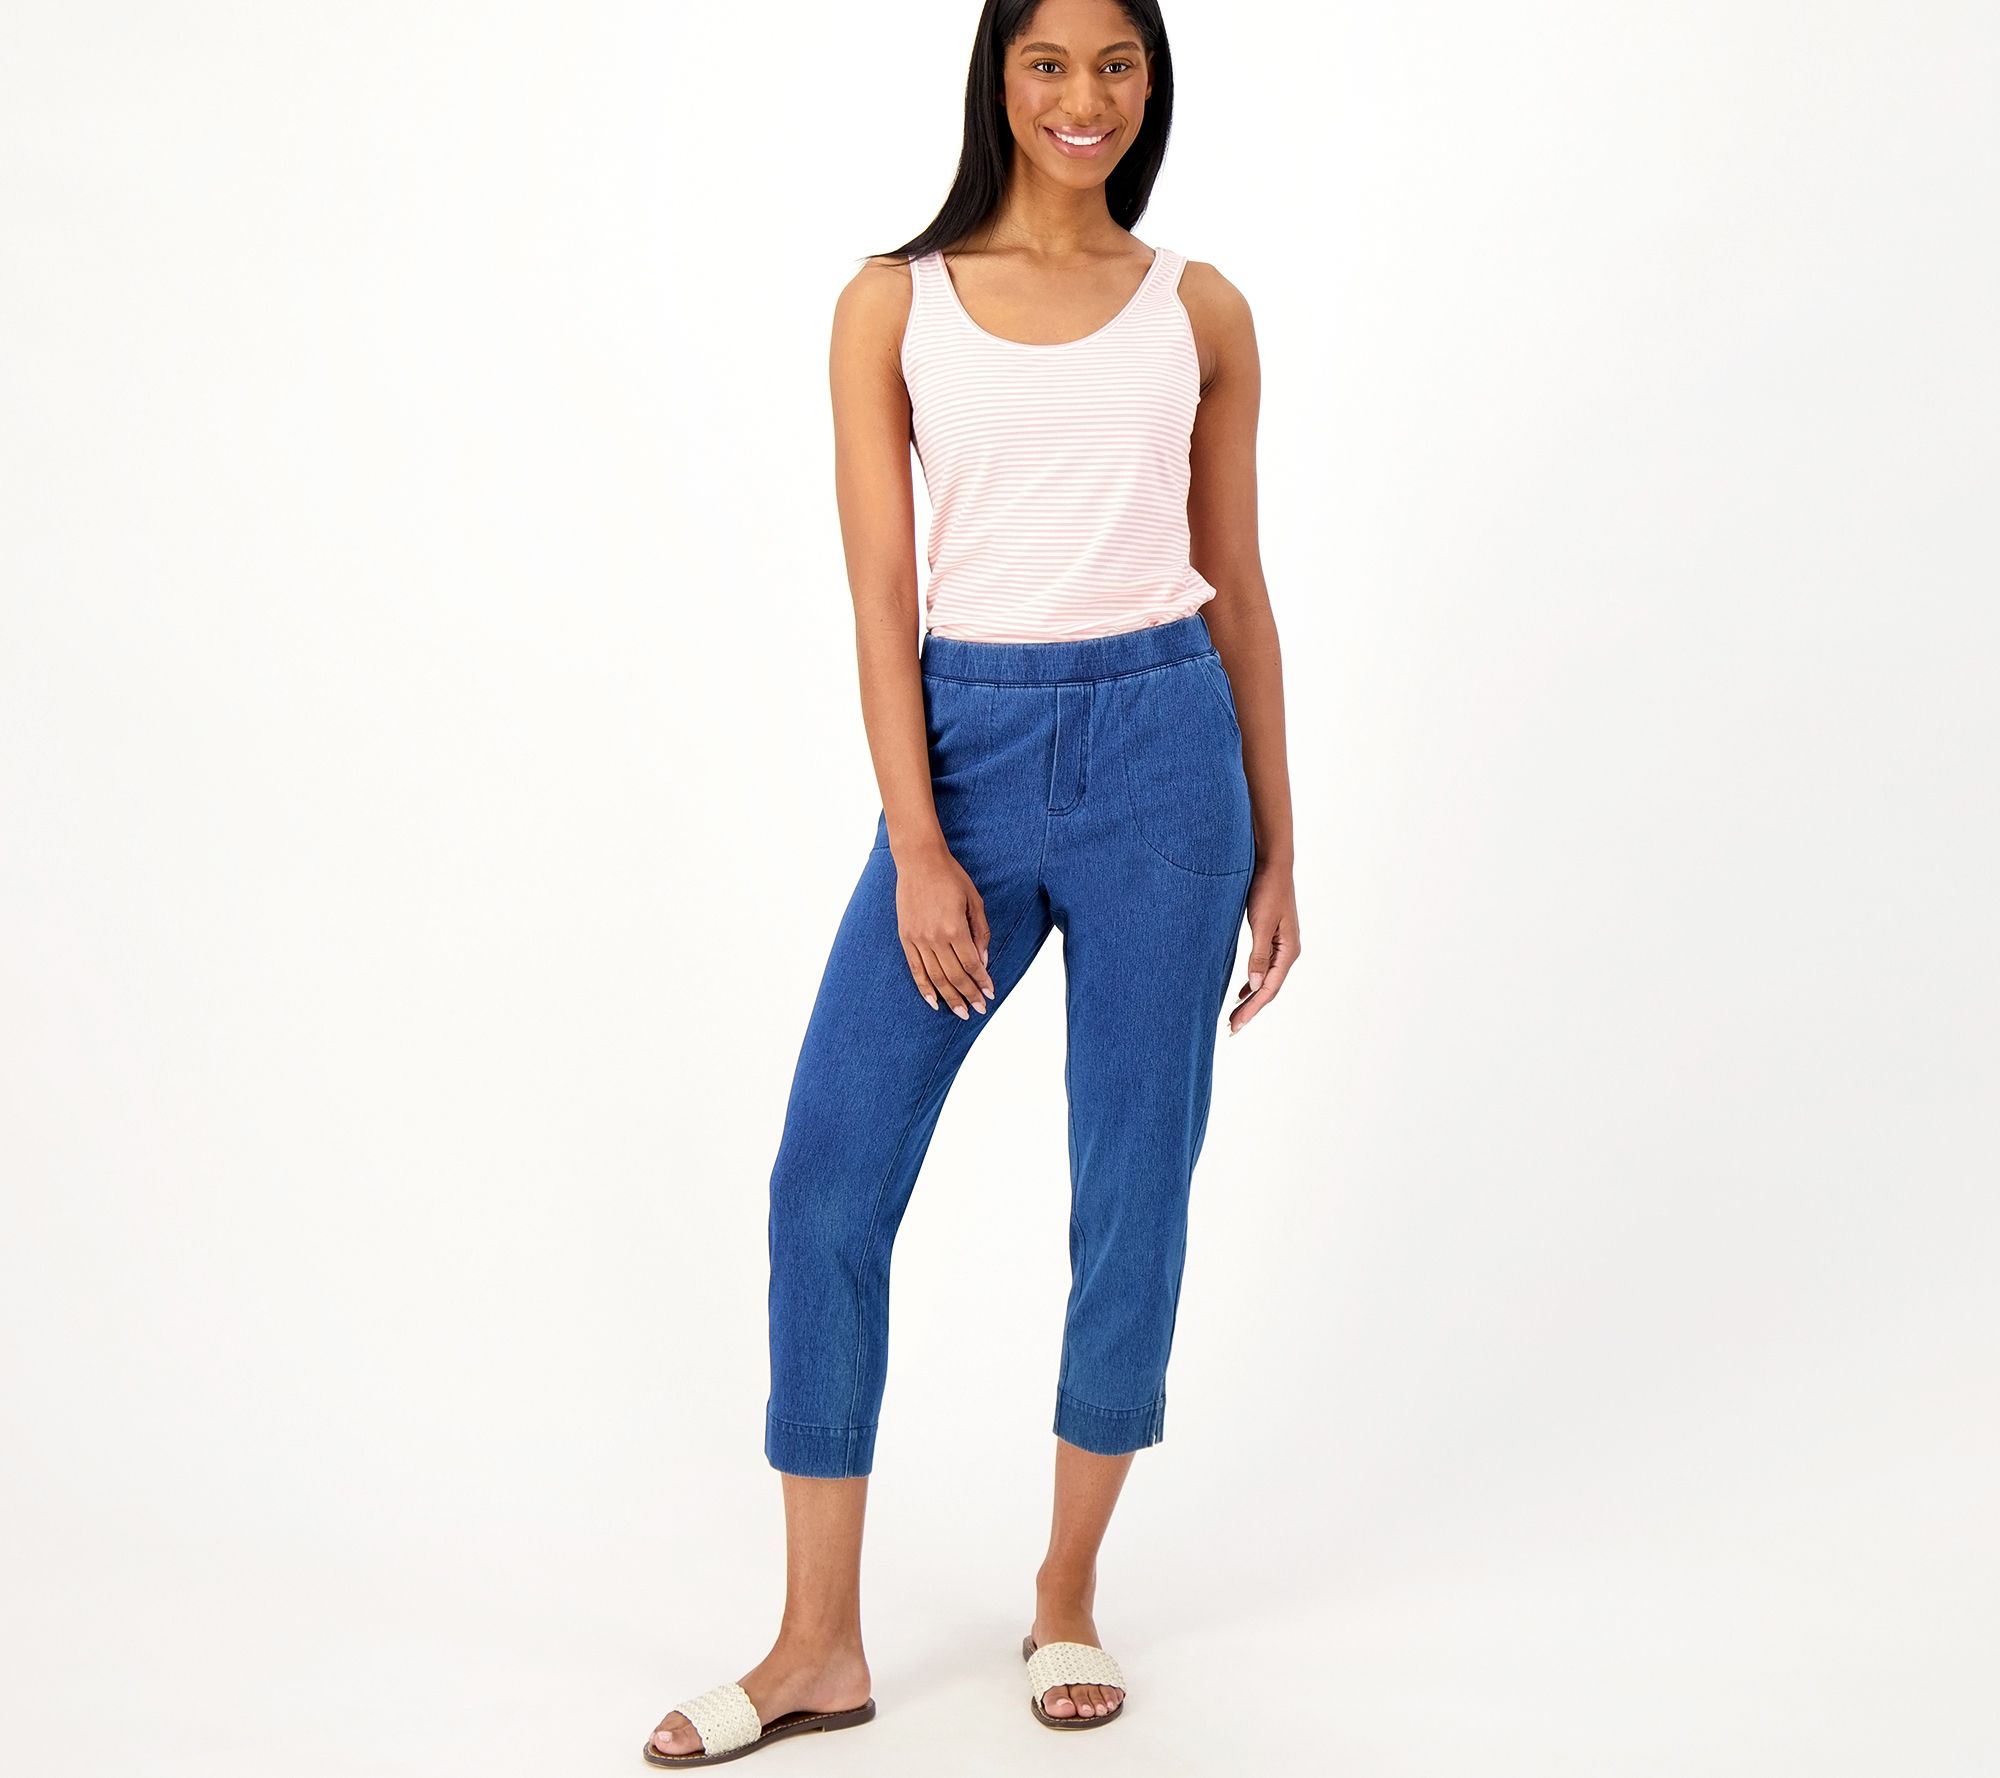 Denim & Co. Comfy Knit Air Denim Tapered Leg Pant with Pockets on QVC 